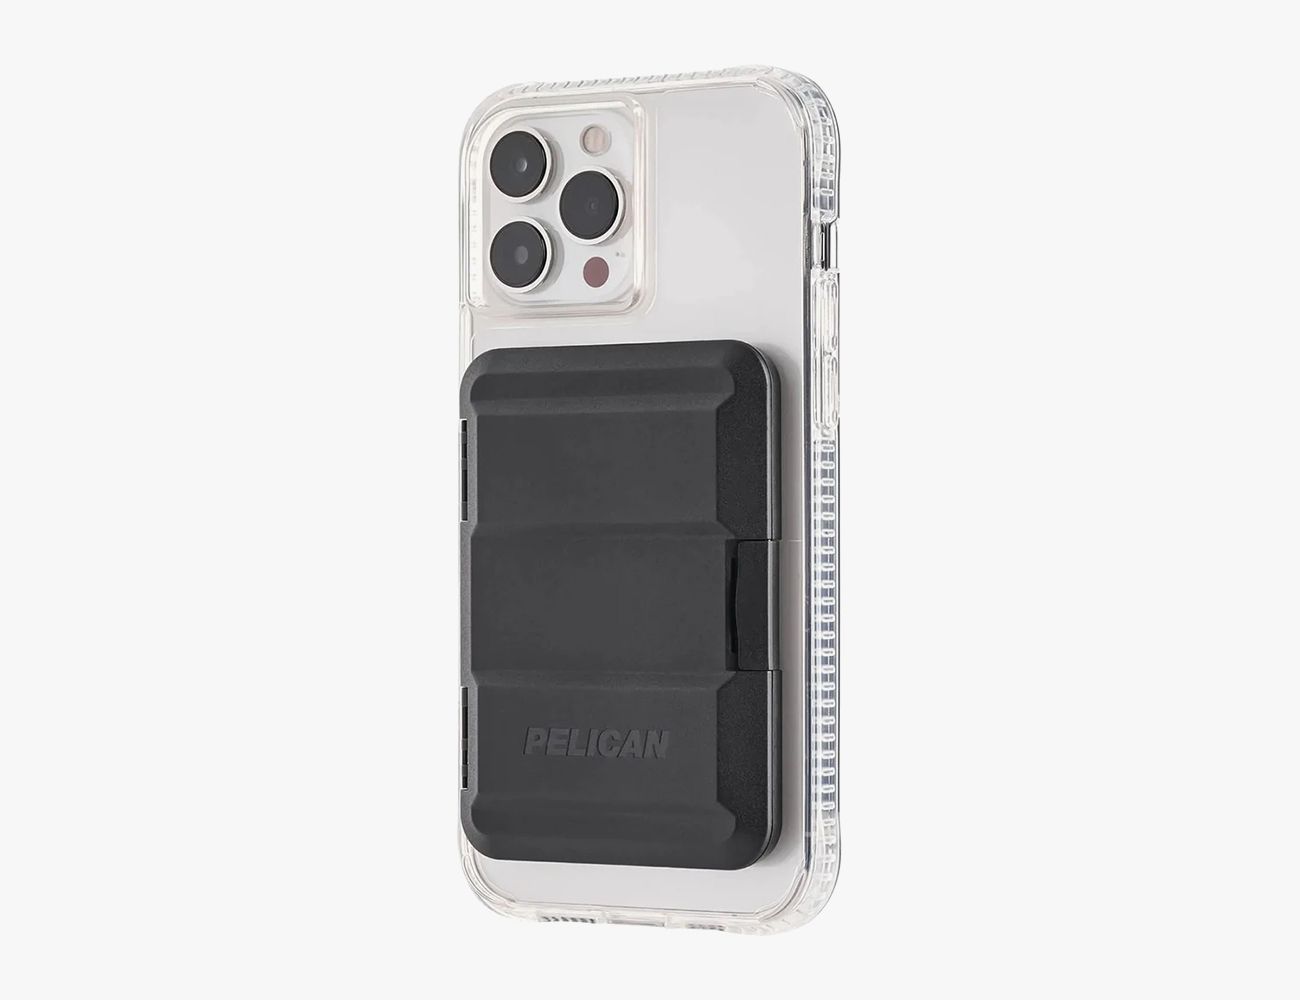 Pelican Magnetic Wallet & Card Holder - Heavy Duty Snap-On MagSafe Black